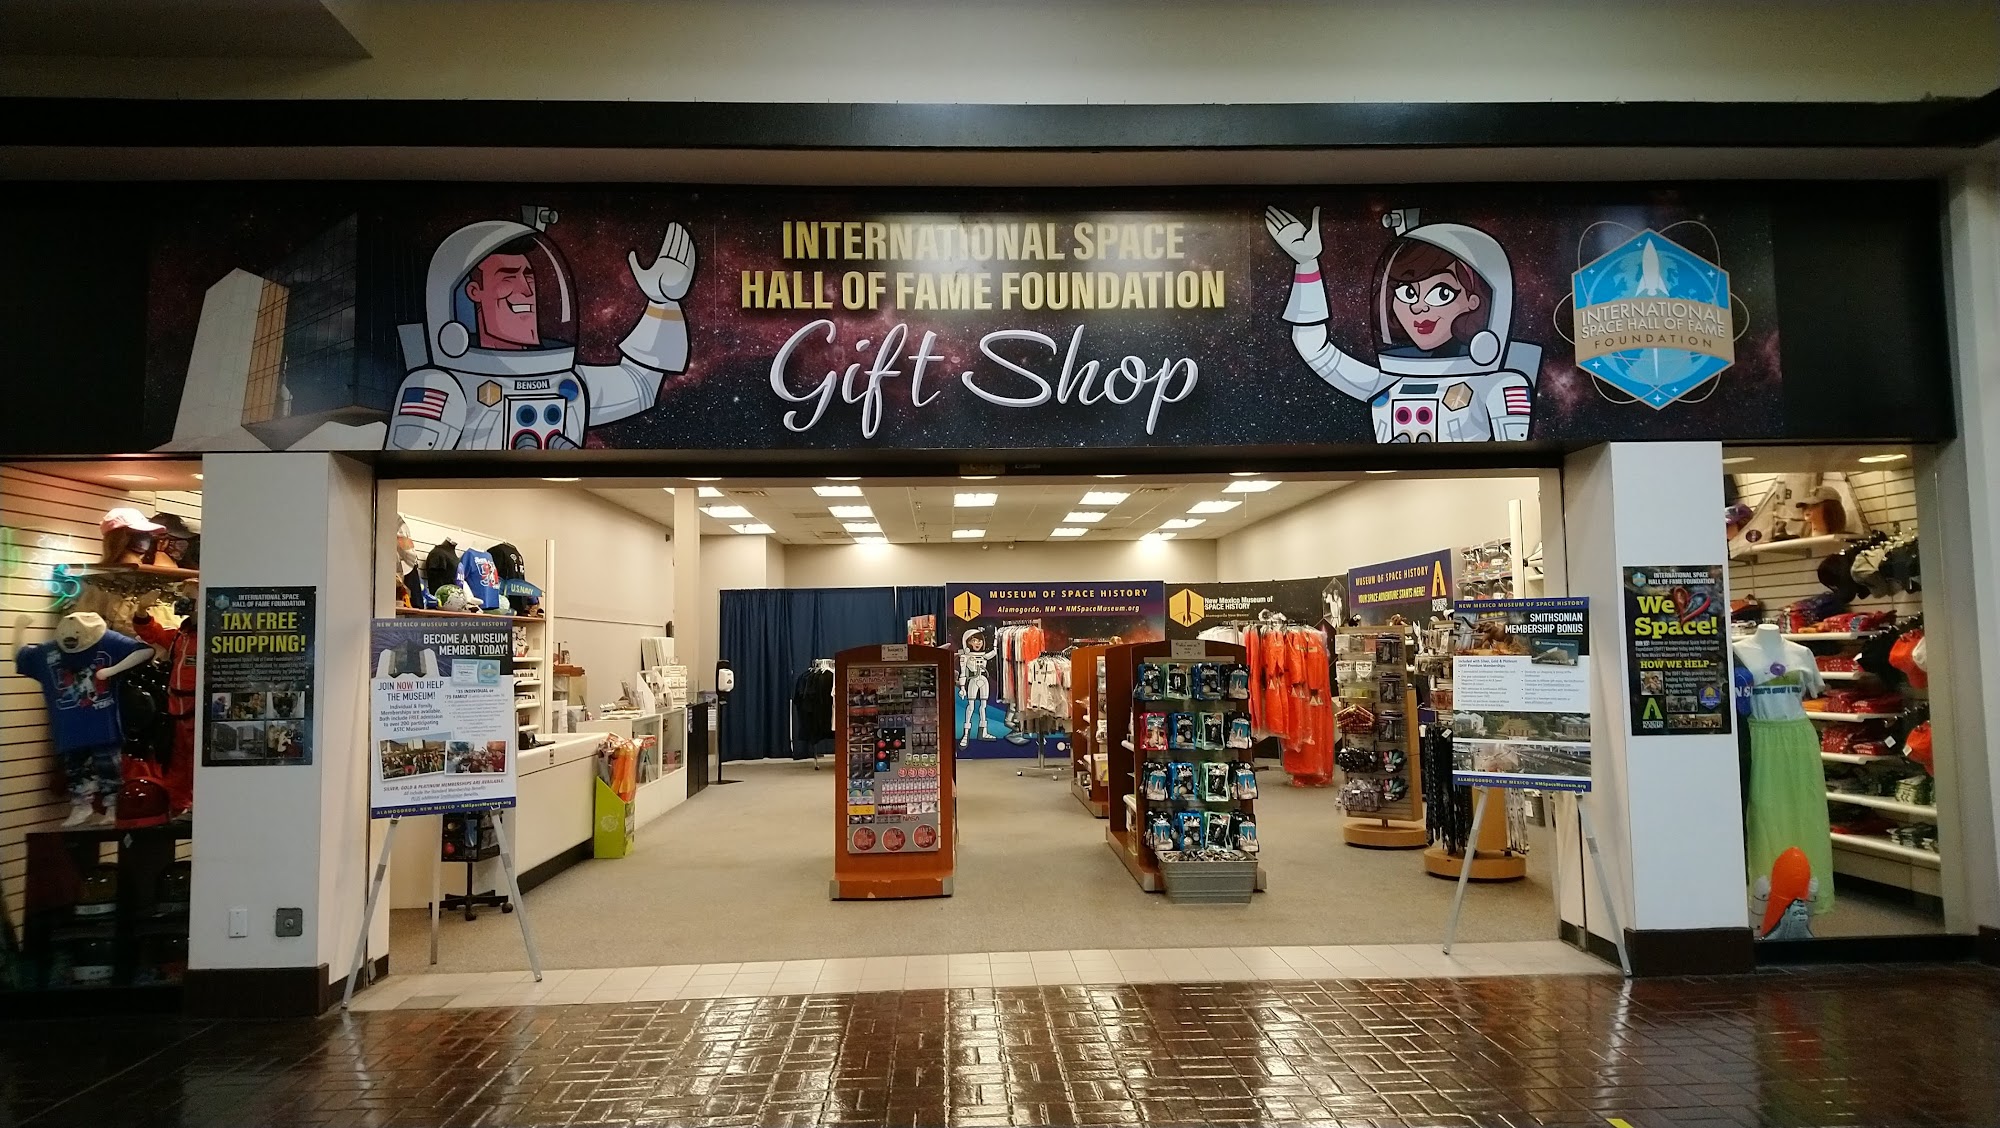 International Space Hall of Fame Gift Shop